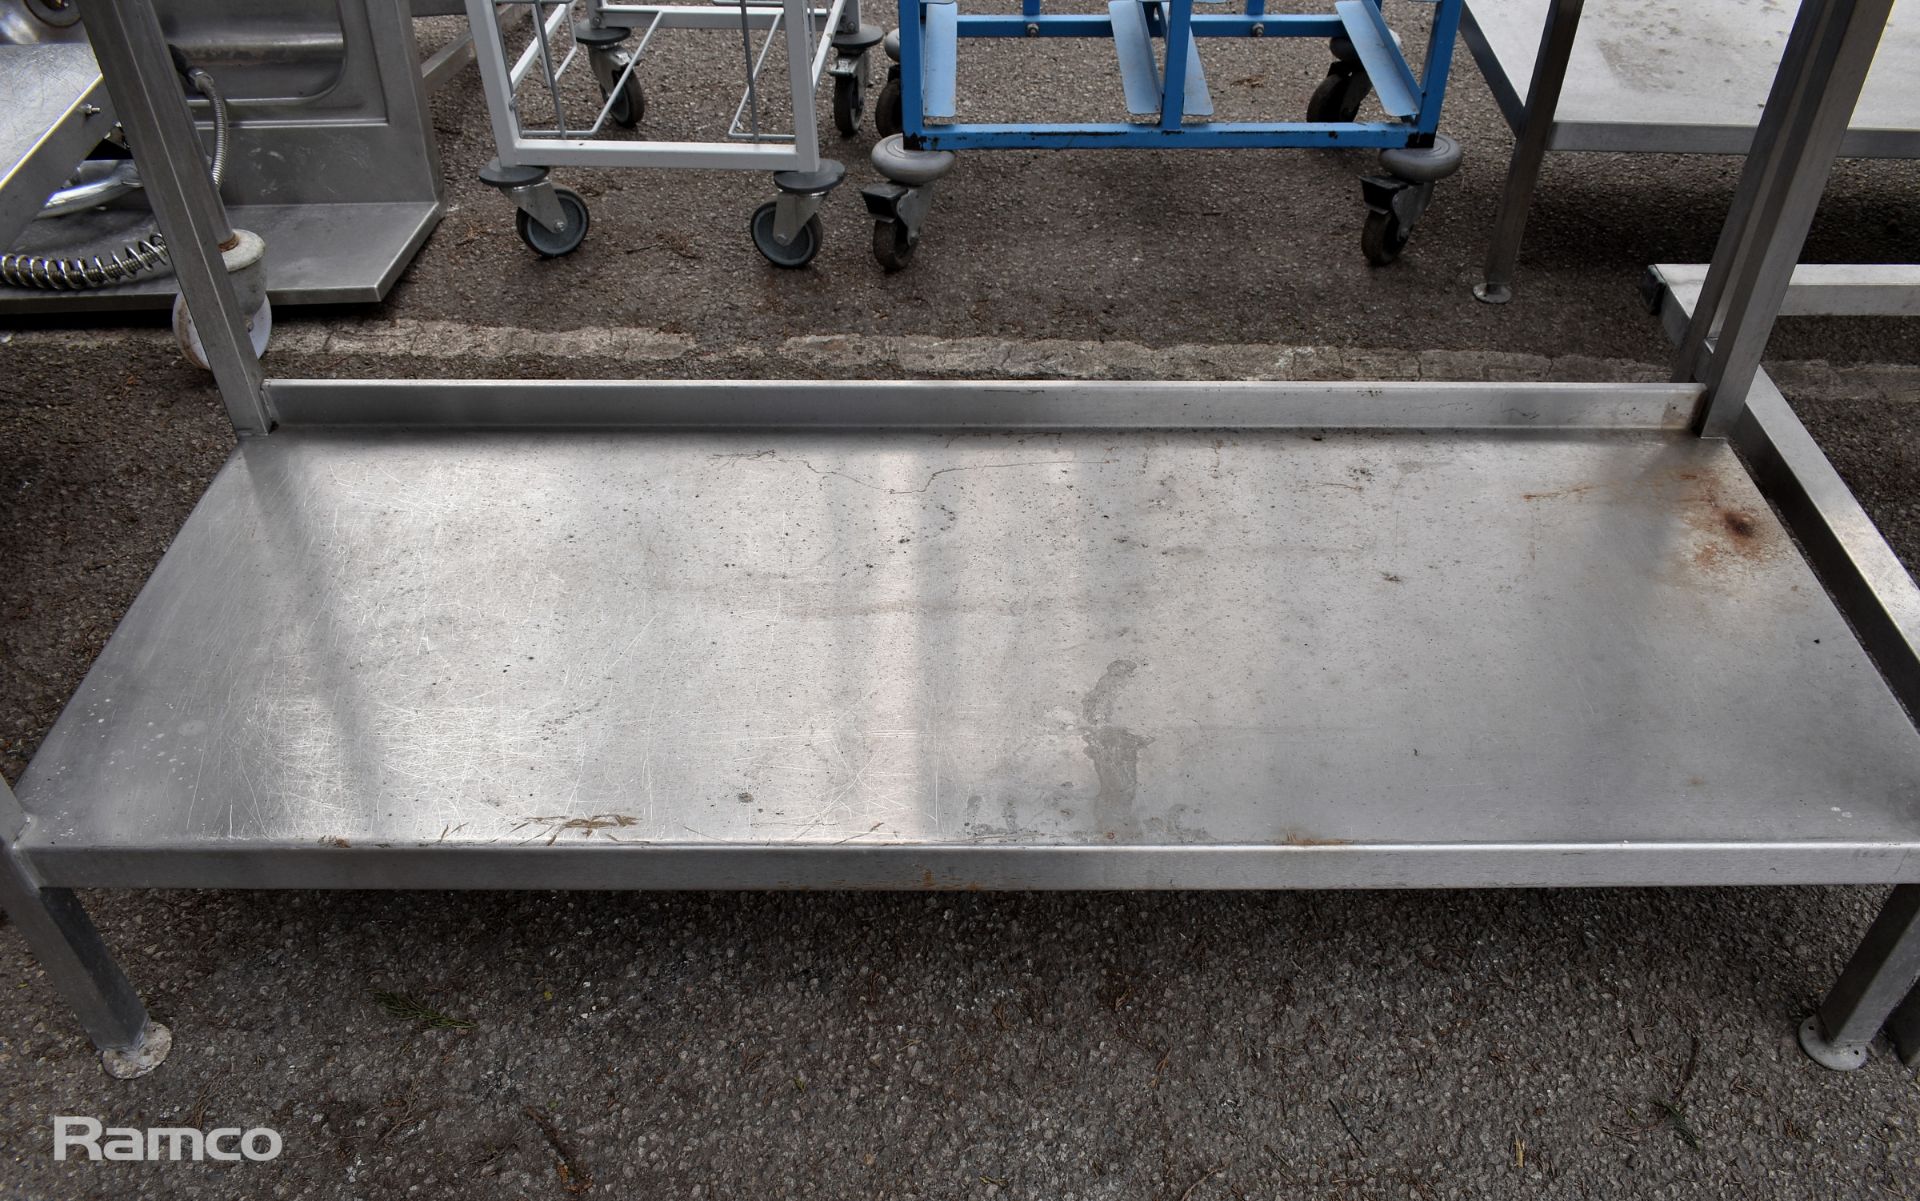 Stainless steel table - W 1400 x D 660 x H 900mm - Image 2 of 3